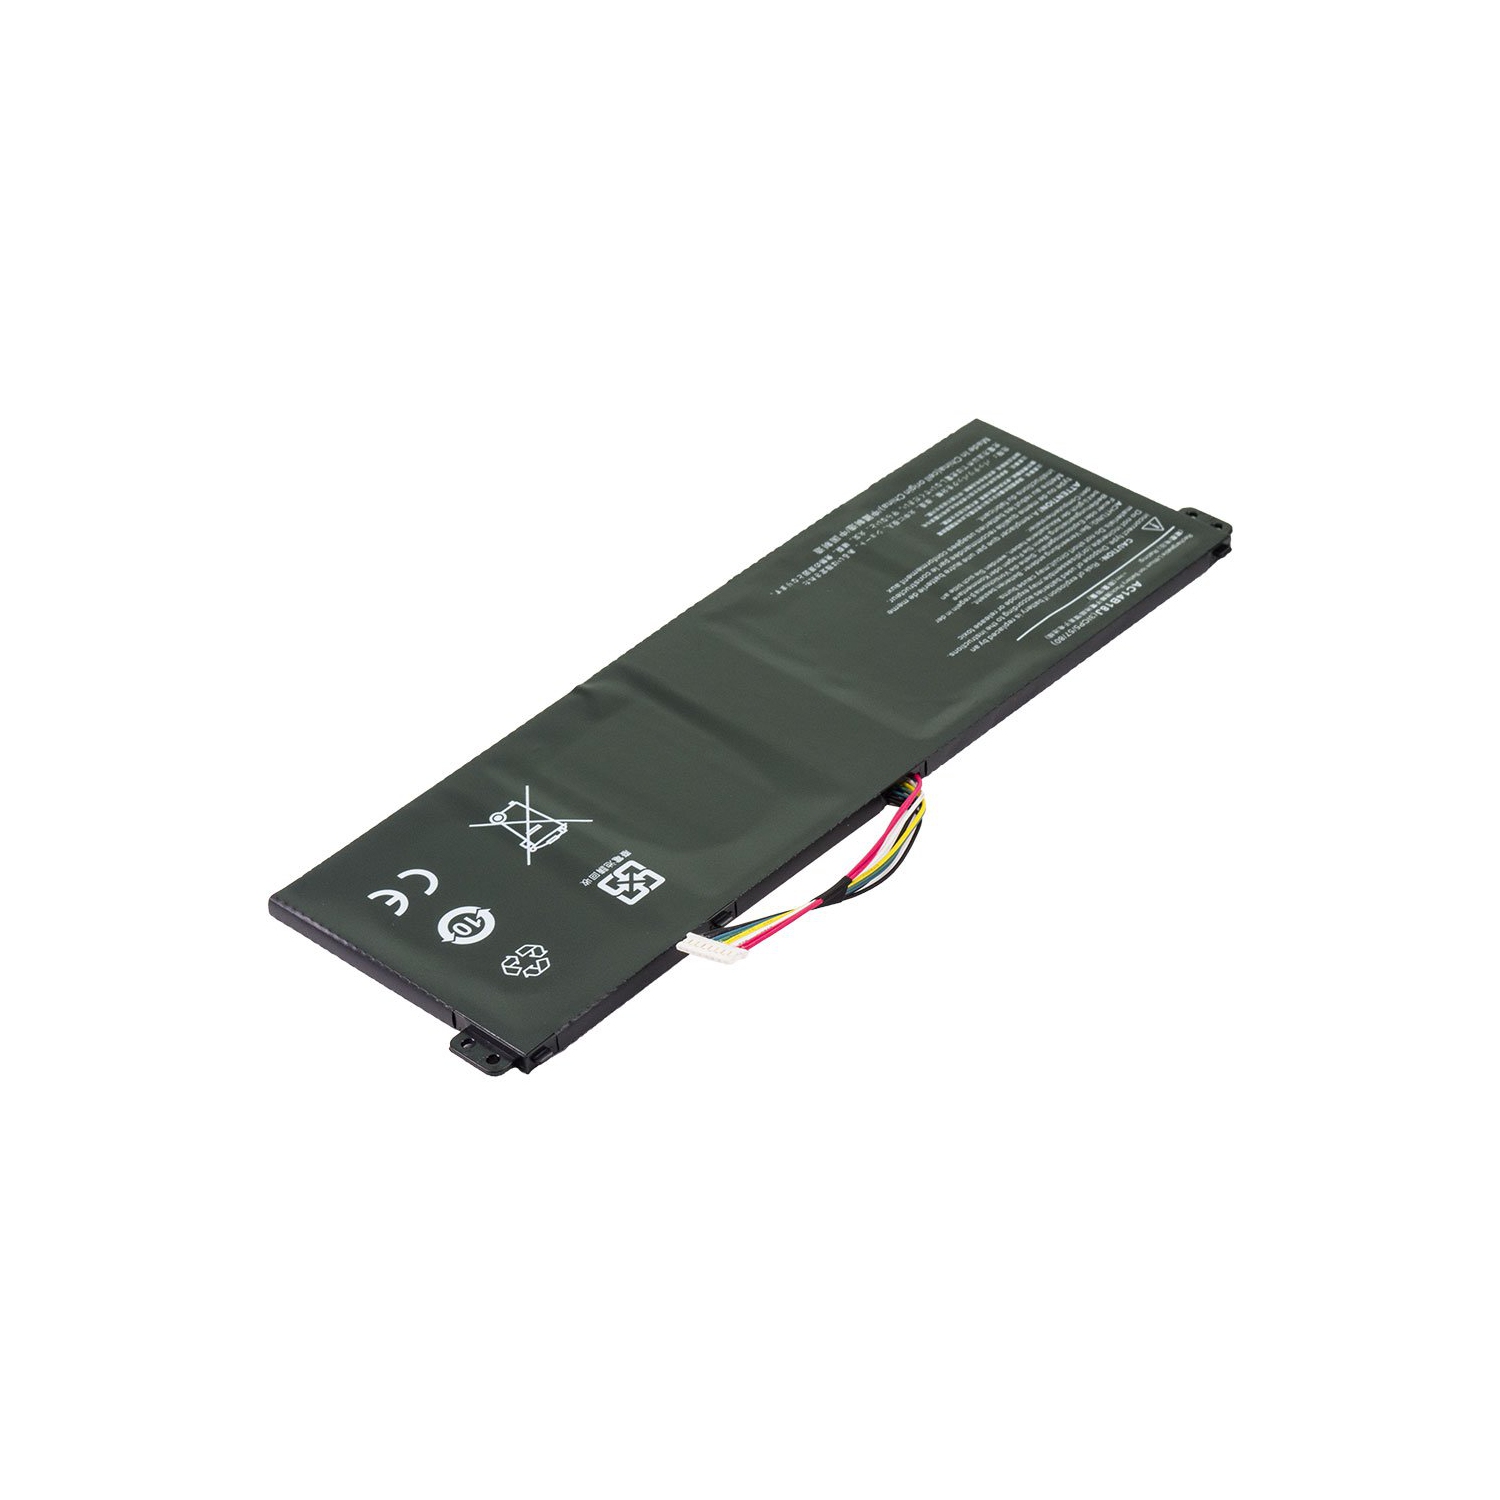 Laptop Battery Replacement for Acer Aspire ES1-731G-P93D, 3ICP5/57/80, AC14B13J, AC14B18J